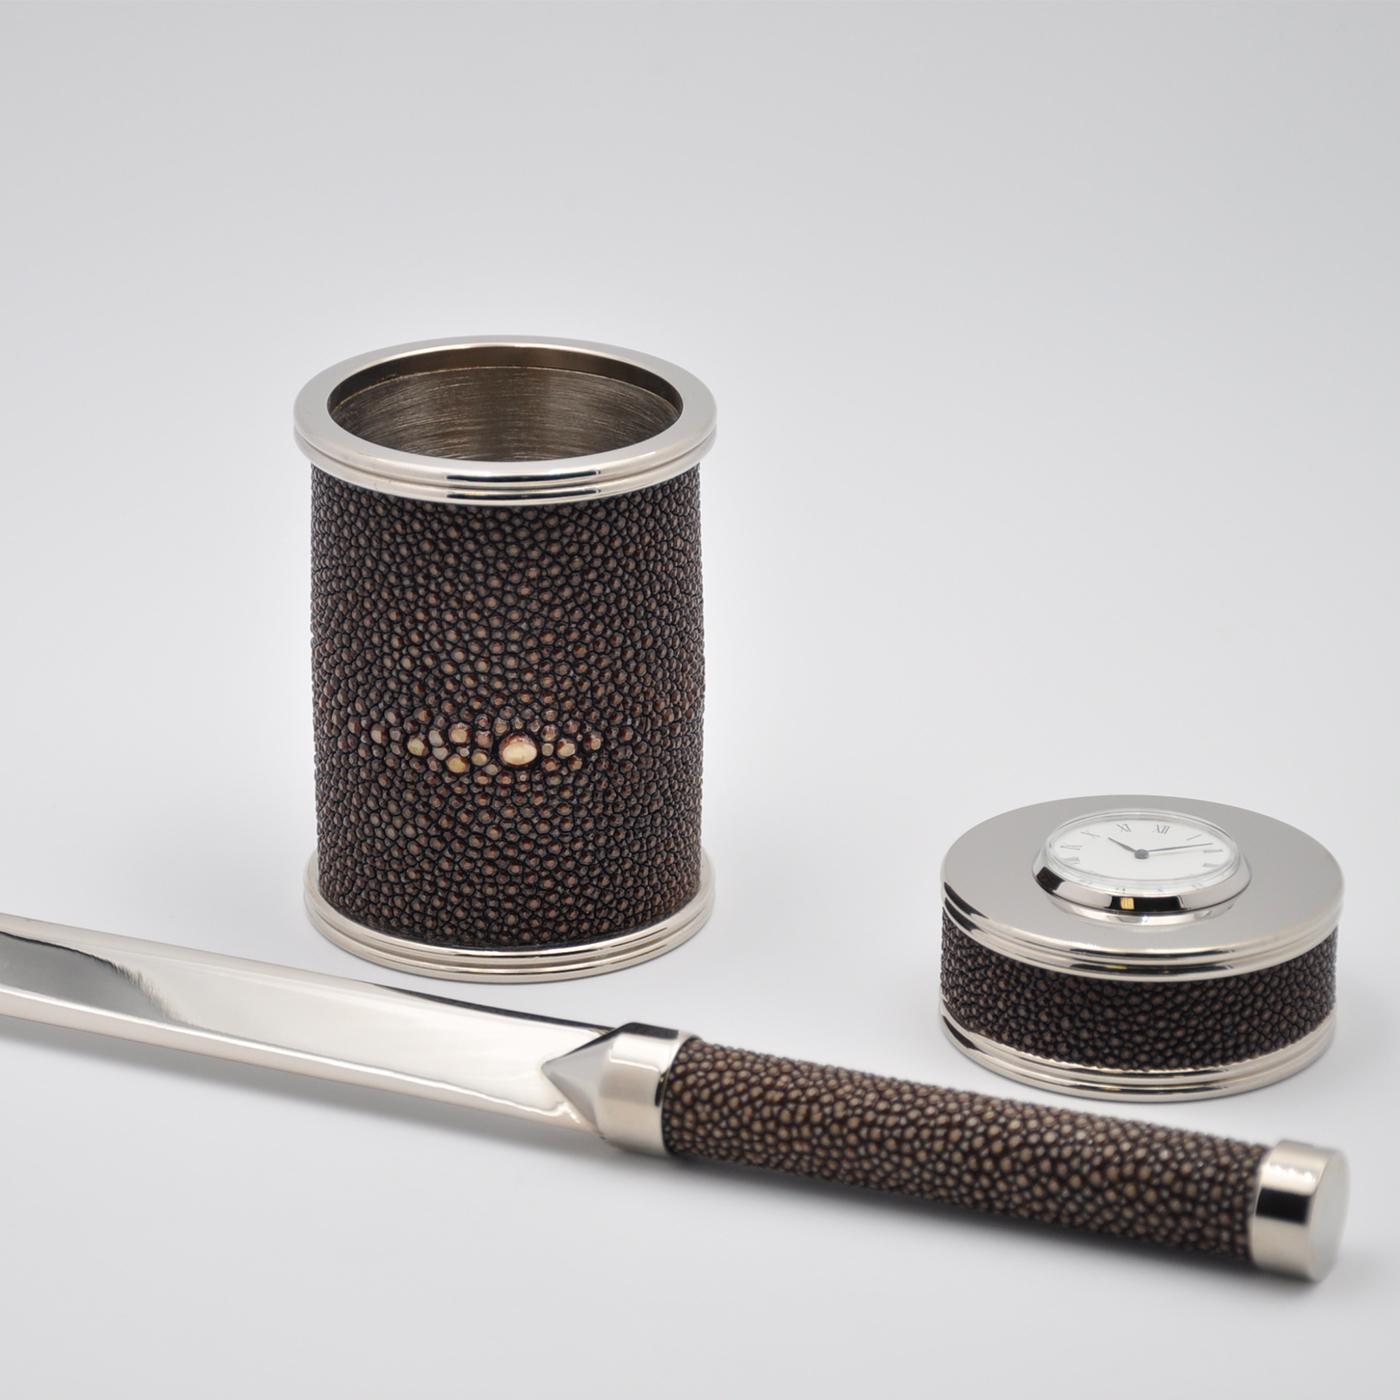 From Galucharme collection in coffee chromatic color, this is a very special and high-class desk gift set, consisting of a pen-holder, a letter-opener and a clock-paperweight, with metal finish in nickel-plated brass. It is covered in shagreen skin,